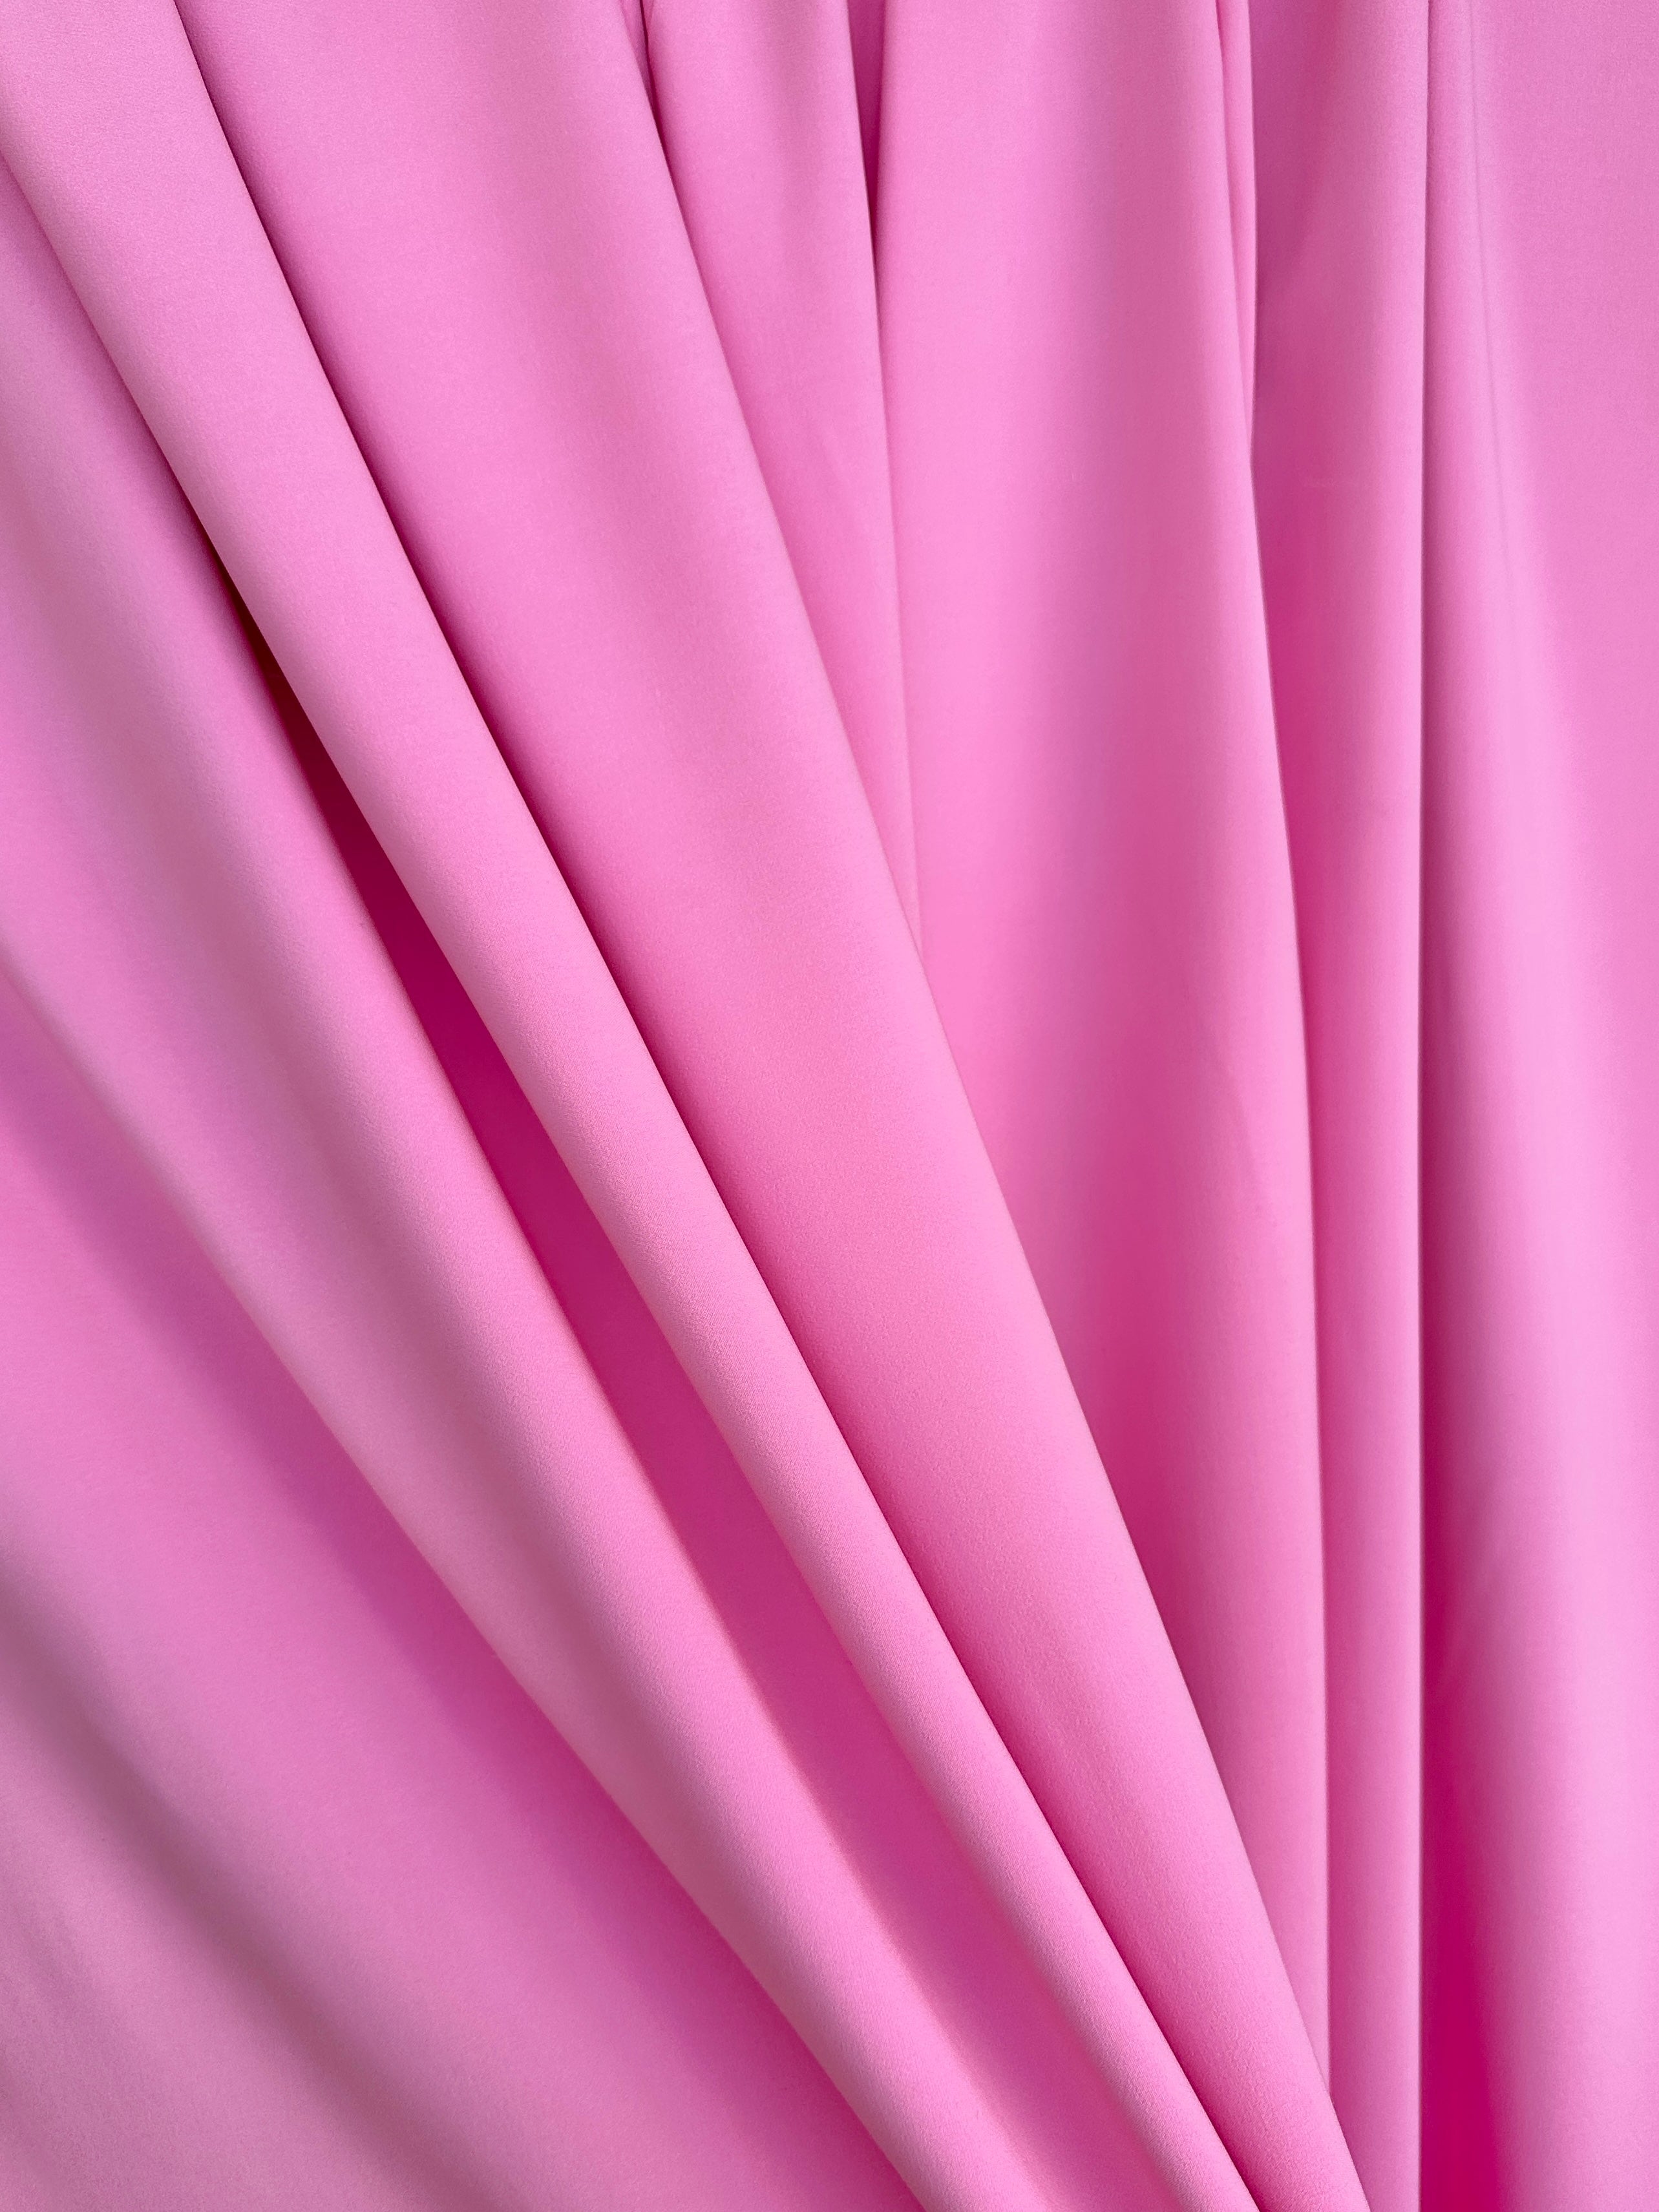 crepe and gabardine, Baby Pink Stretch Crepe Fabric, Princess Pink Moss Crepe Fabric By yard, Pink 4ply crepe, Baby Pink Spandex Fabric, Baby Pink Stretch Twill, gabardine for woman, fabric on sale, discounted fabric, gabardine on sale, buy fabric online